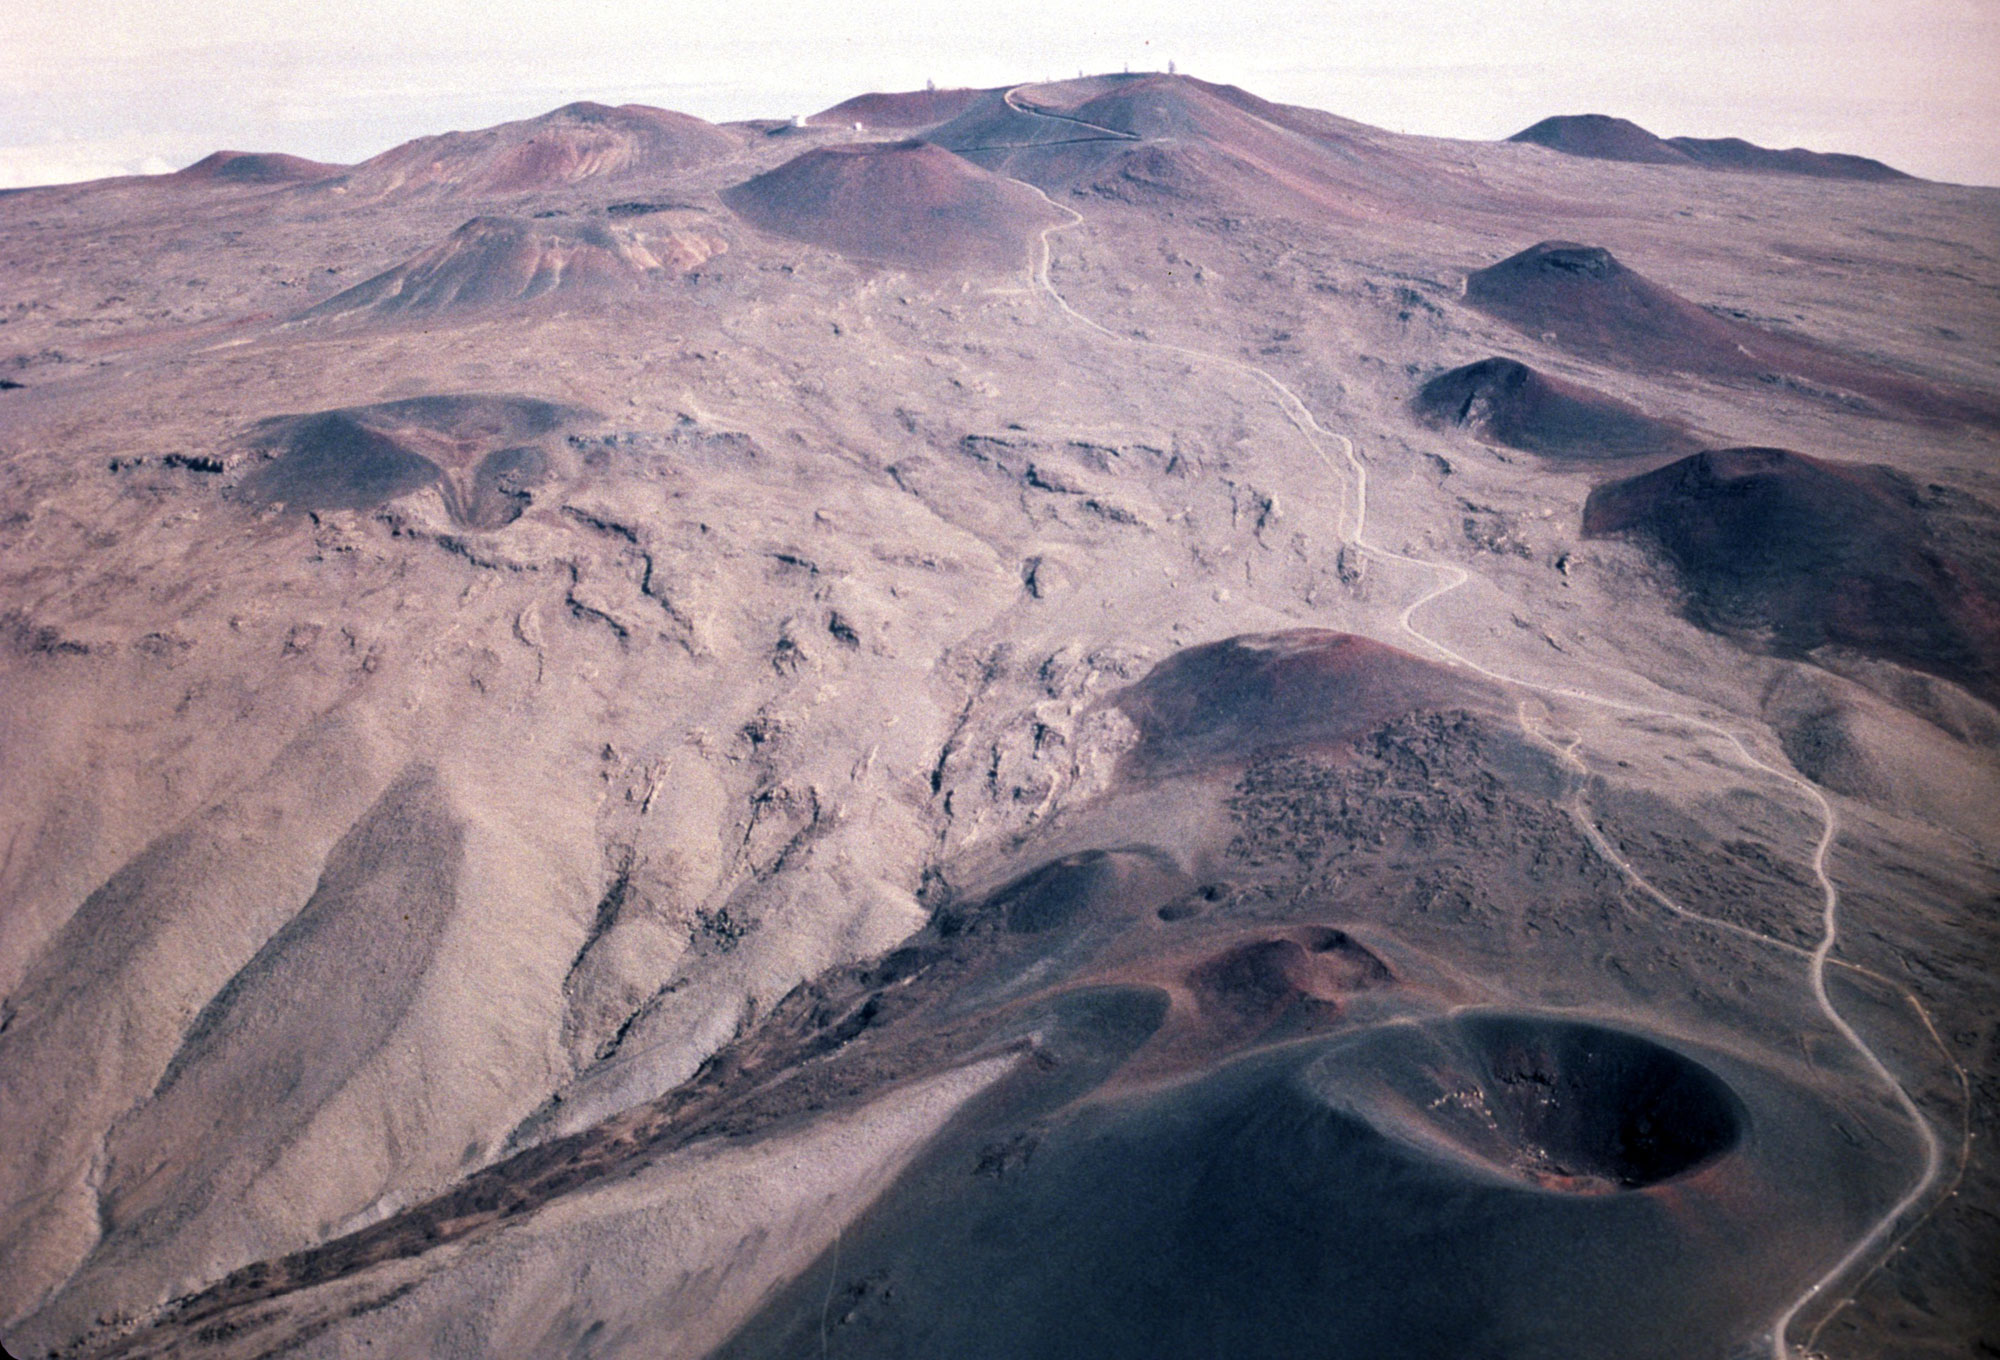 Photograph taken near the summit of Mauna Kea. Mauna Kea is in the post-caldera stage and the surface of the mountain near the summit has multiple cinder cones, giving it a "bumpy" appearance. The landscape is the photo is dry and lacks vegetation.